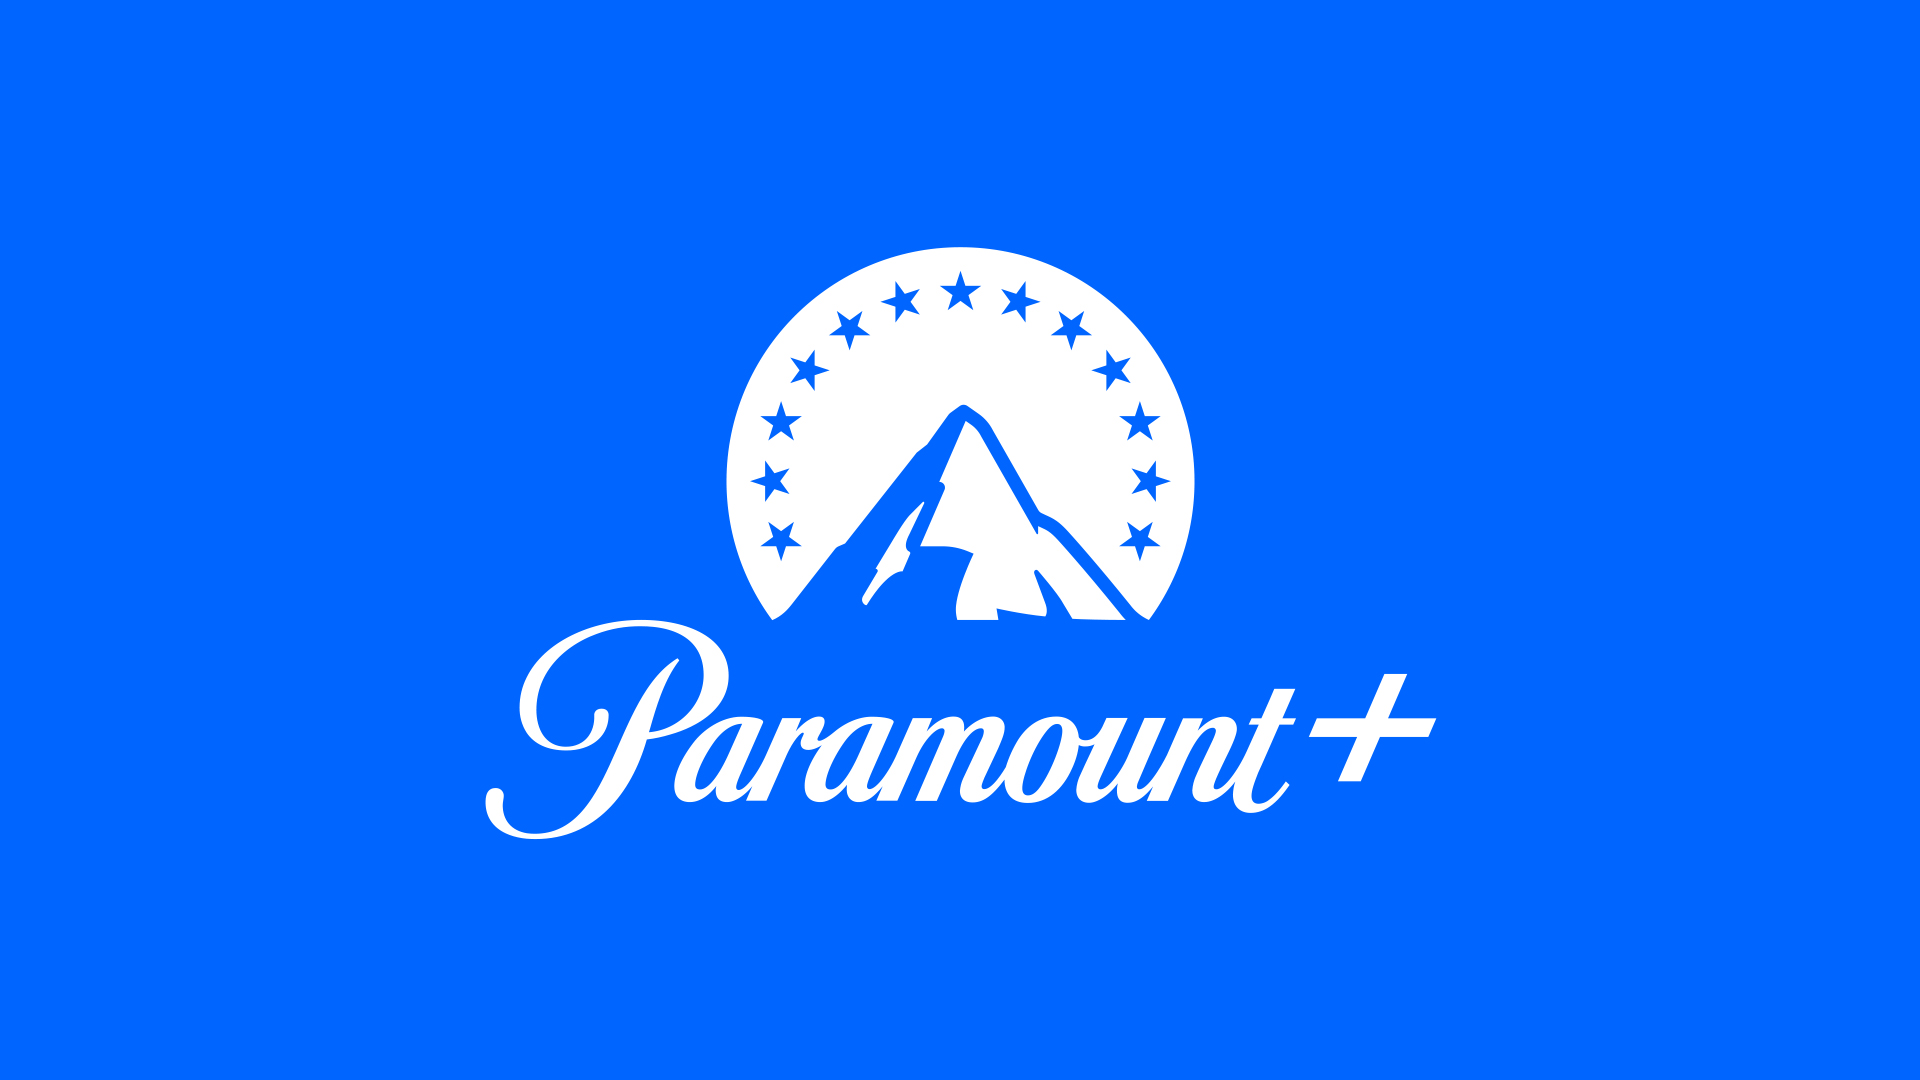 More Staff Cuts Coming to Paramount